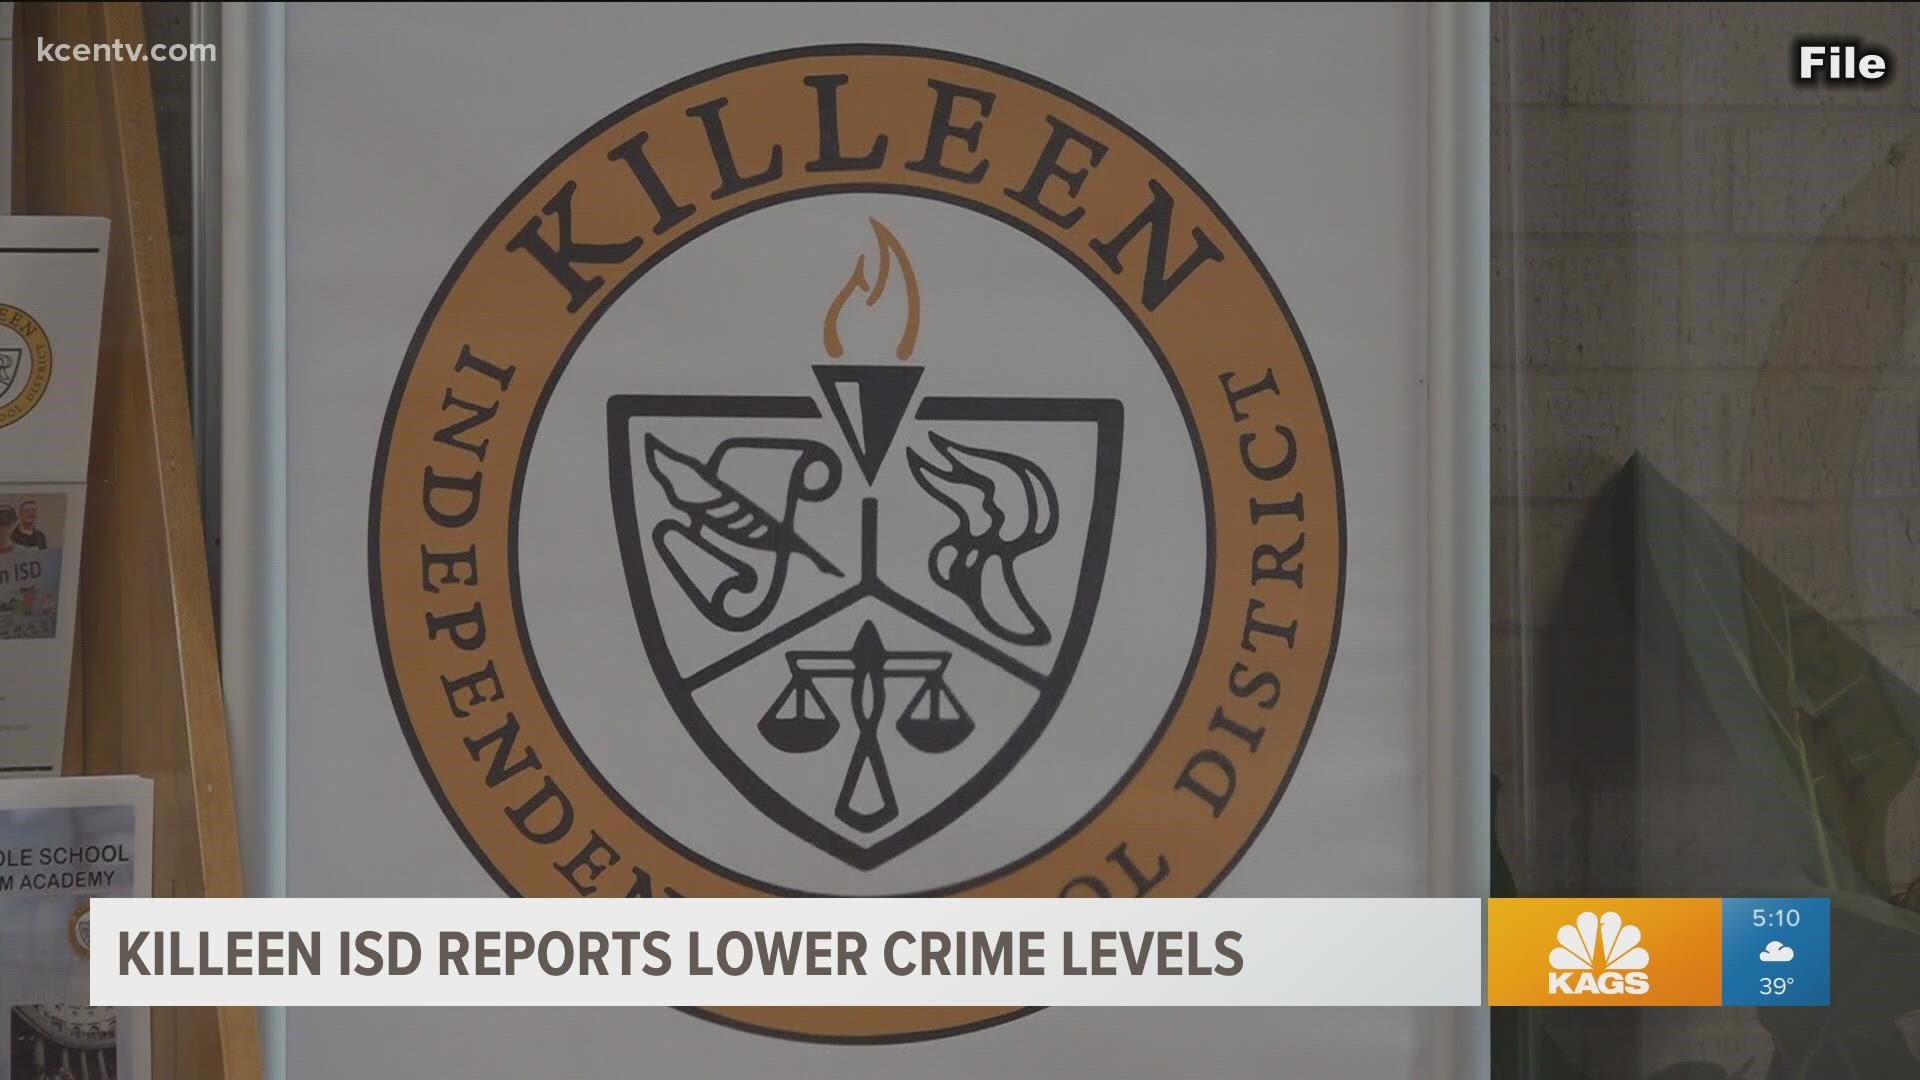 Crime is down 13.4 percent in KISD, but police say there is still room for improvement in the community.